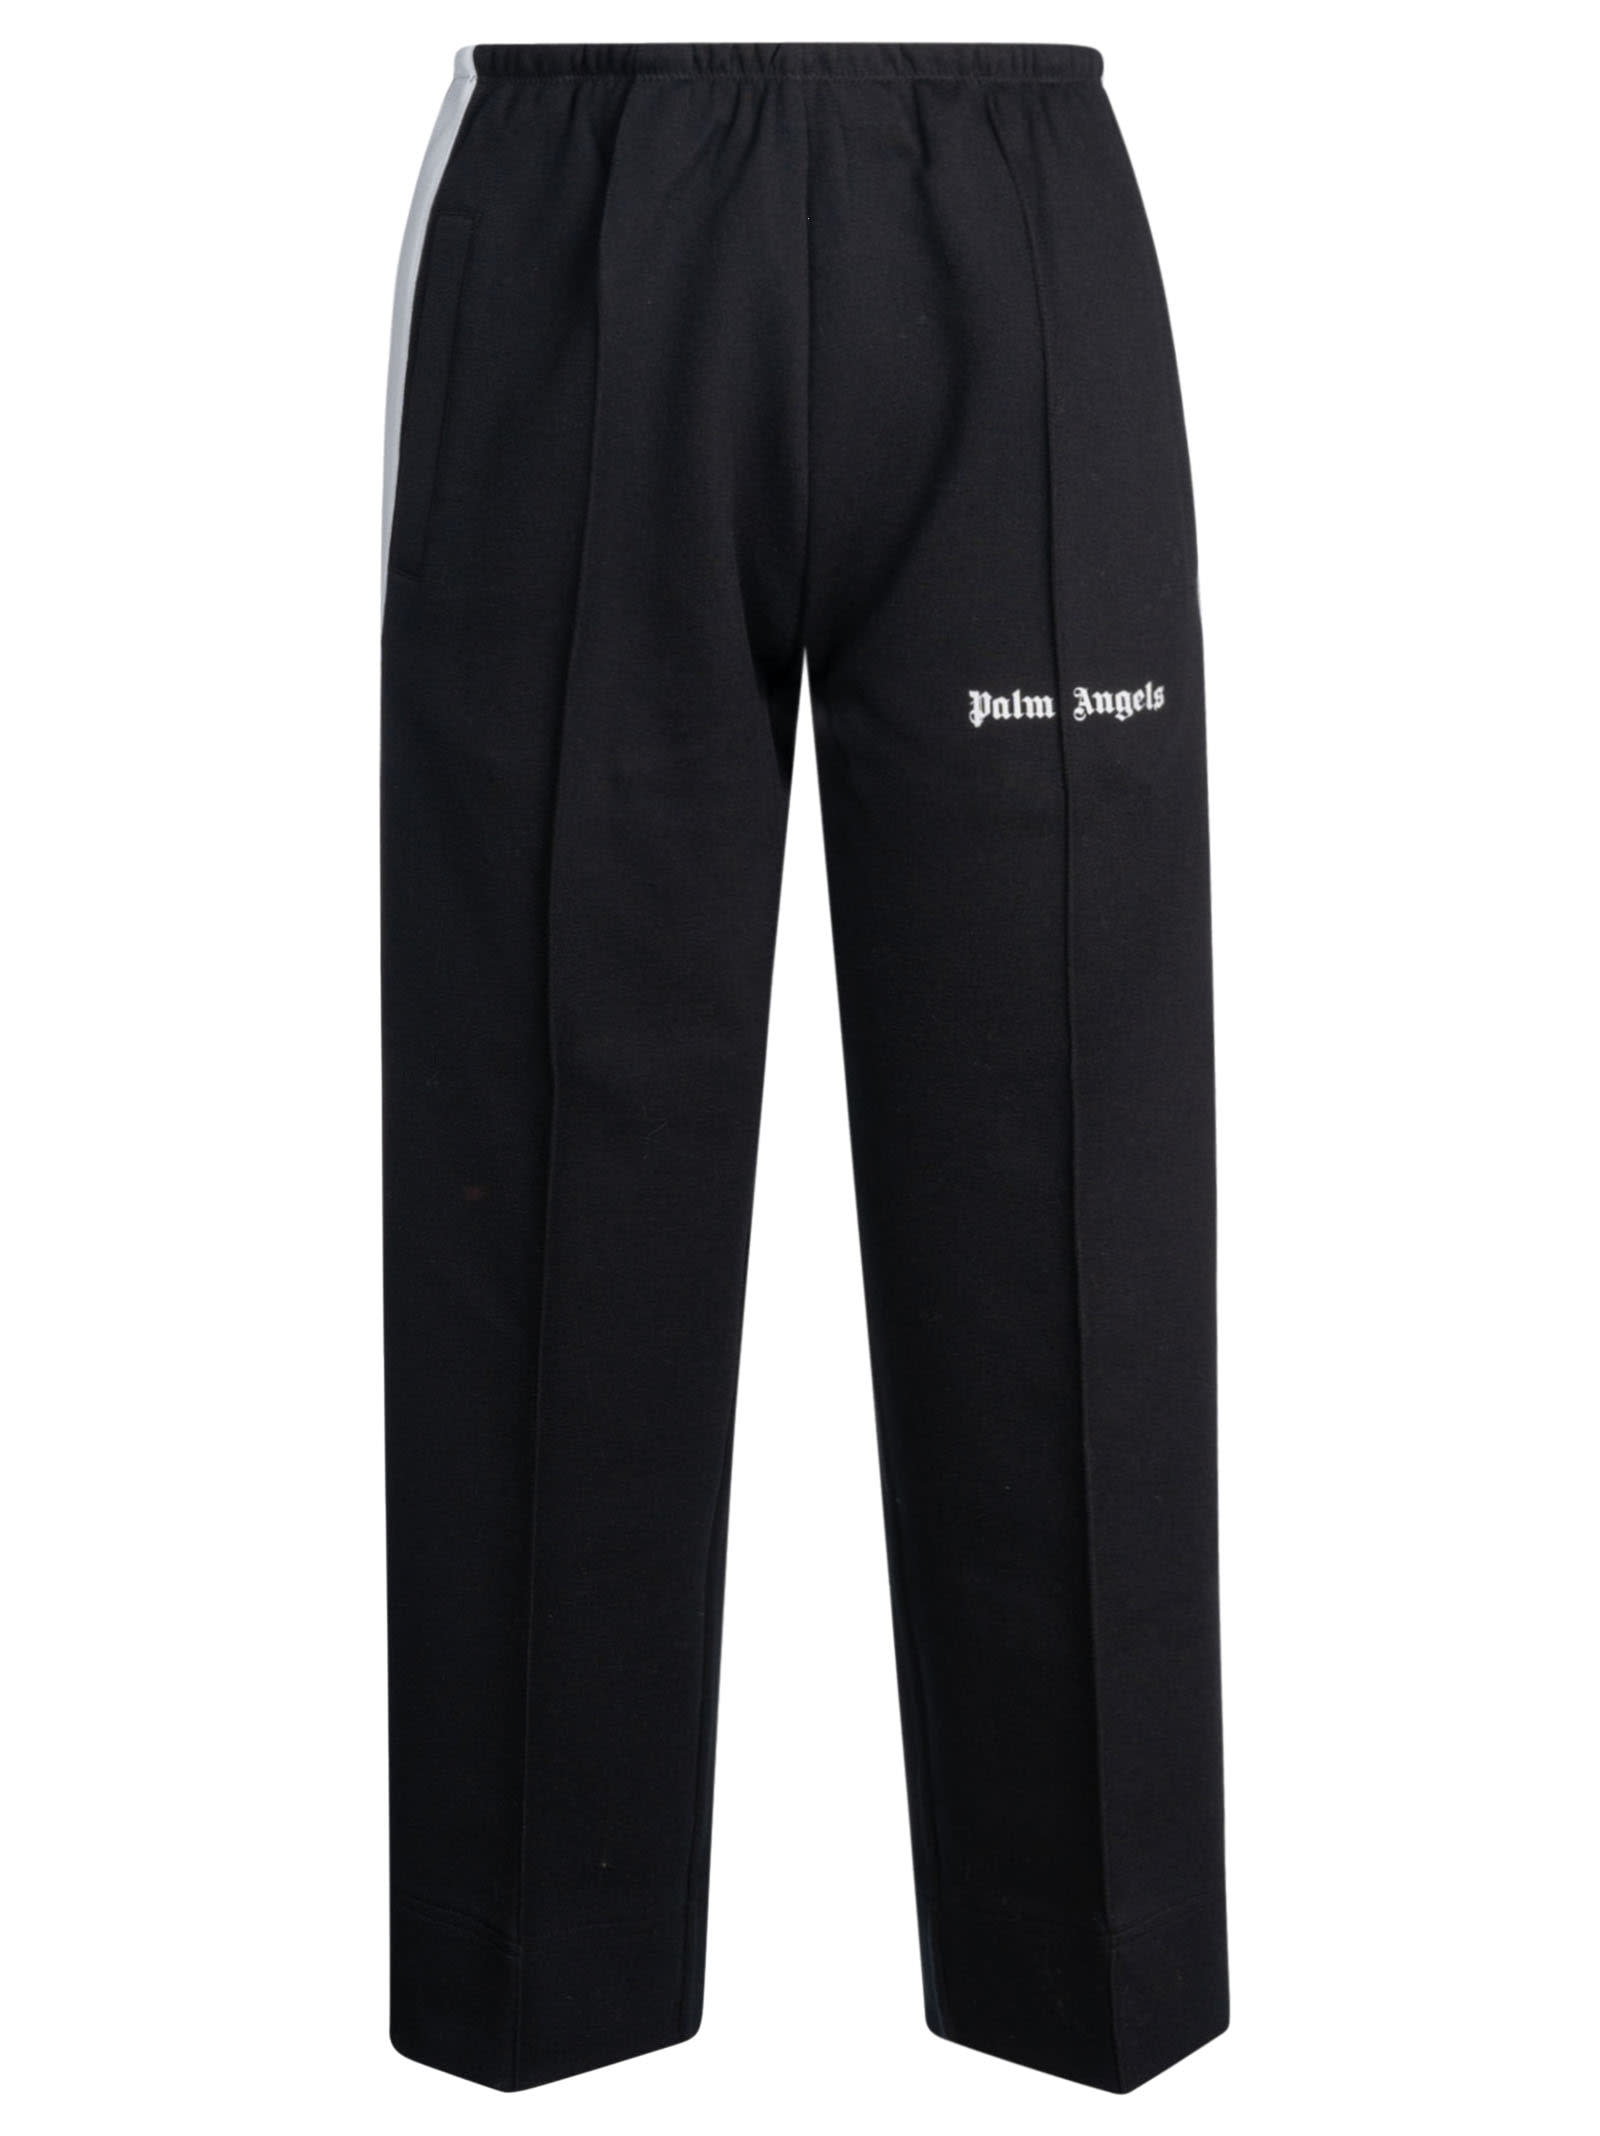 Palm Angels Bold Loose Suit Trousers